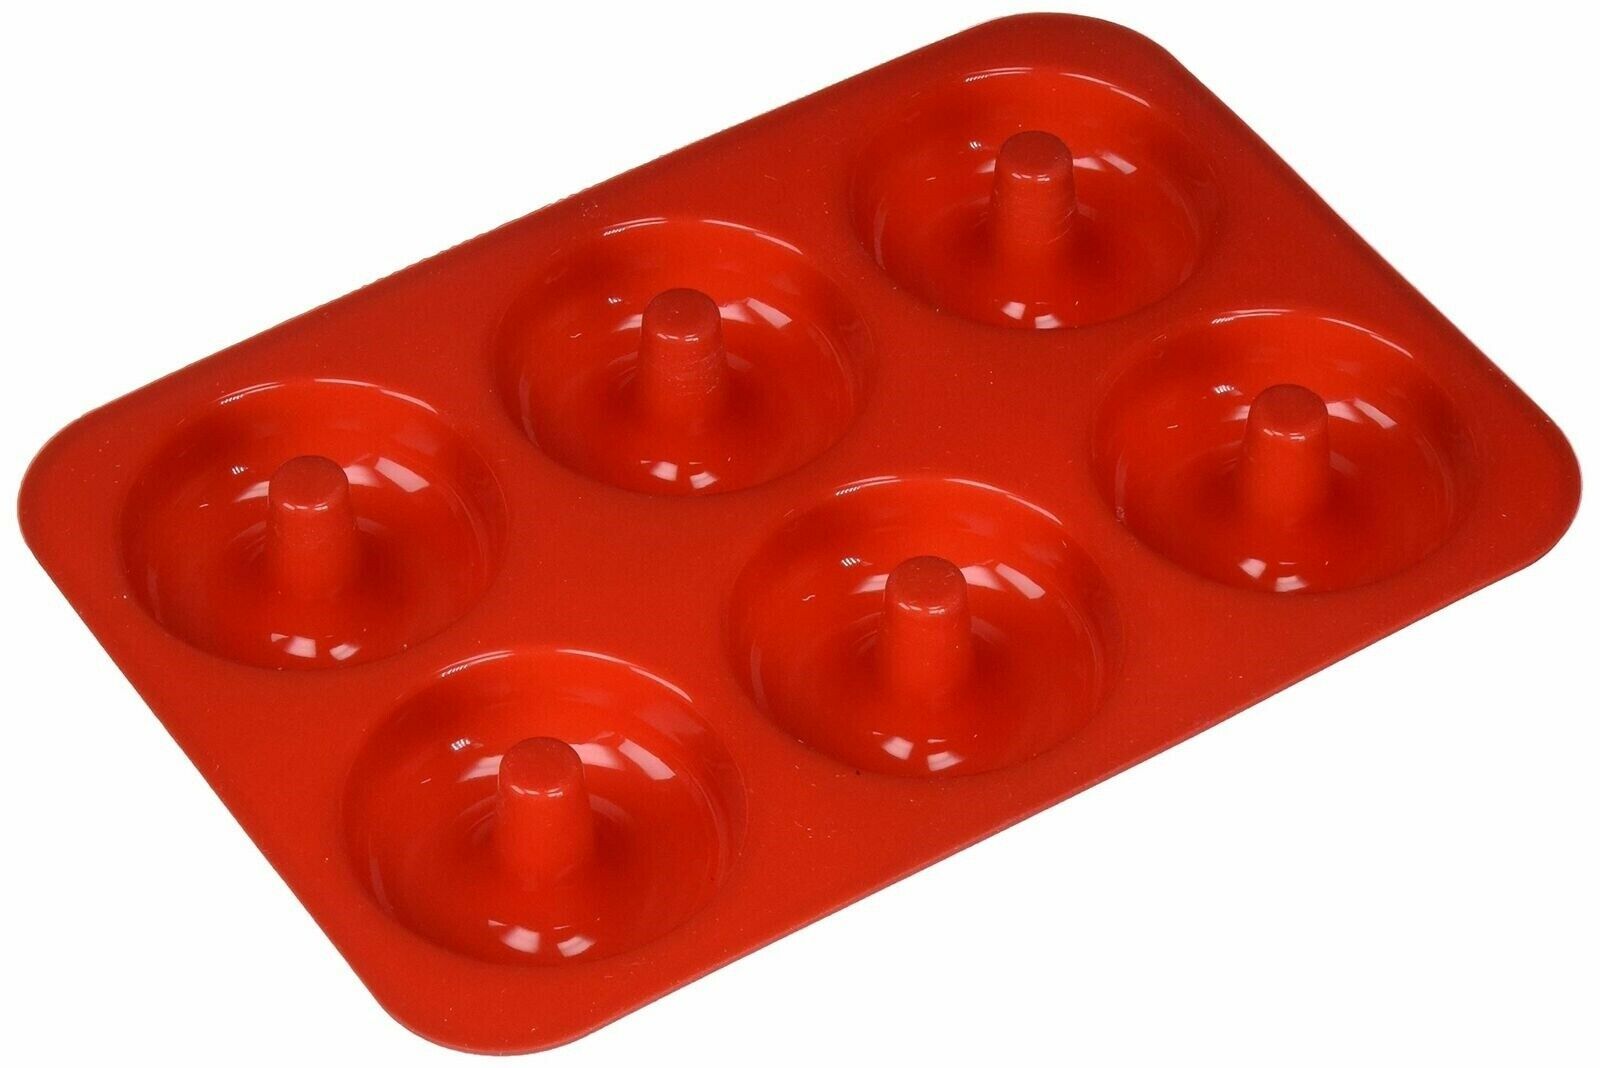 Primary image for Mrs. Anderson’s Baking 43840 Donut Pan, 6-Cup, Red